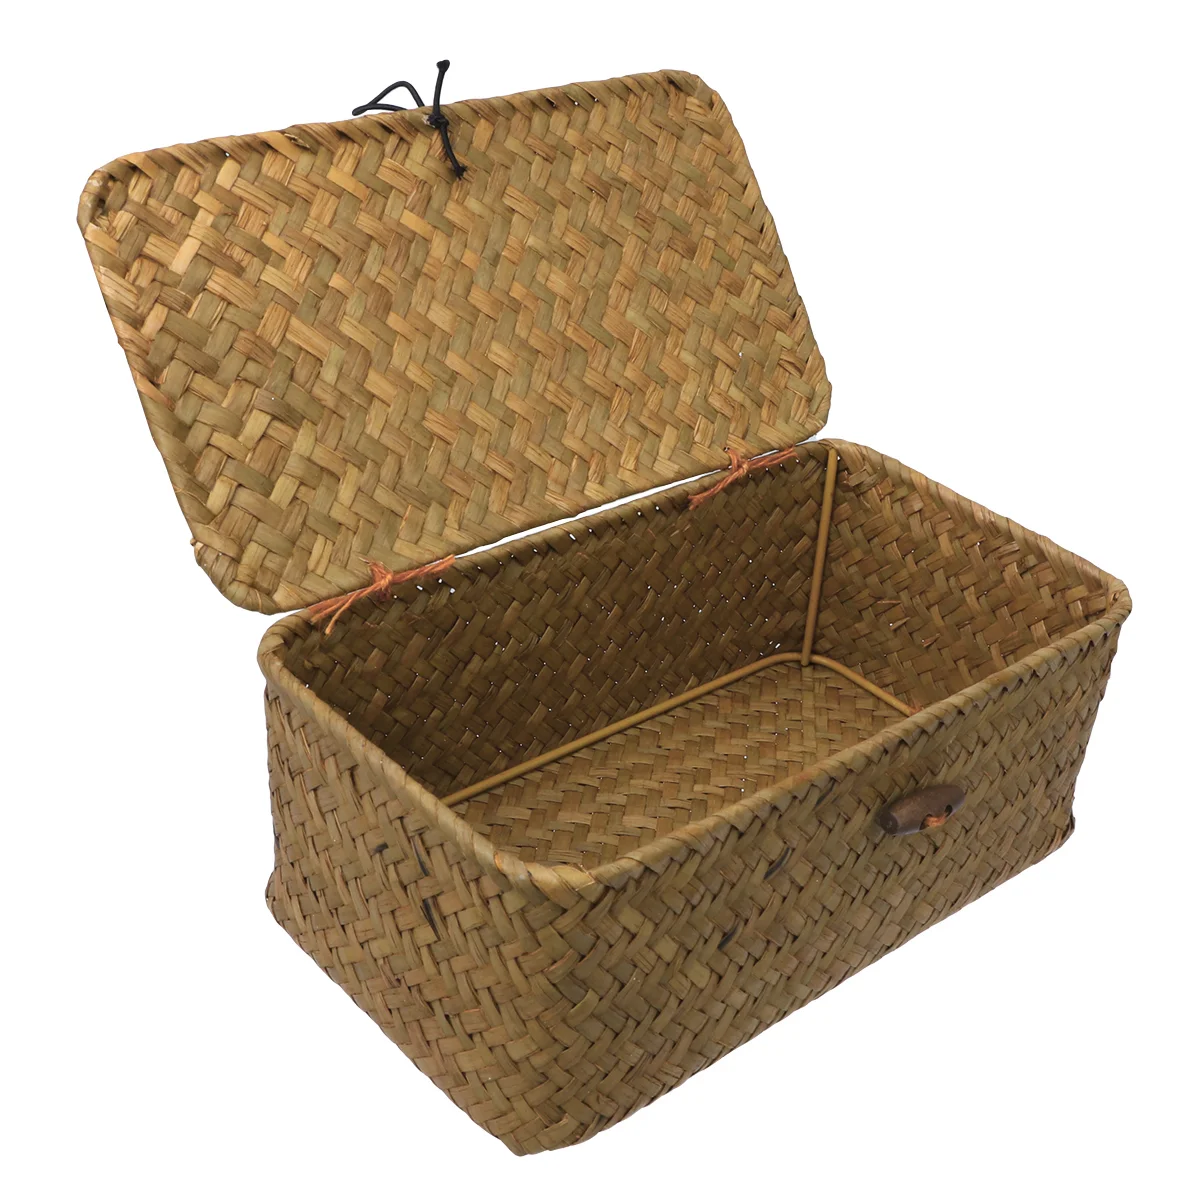 

Seagrass Baskets with Lids Woven Storage Box Handwoven Seagrass Basket Sundries Storage Box for Bedroom Bathroom ( )